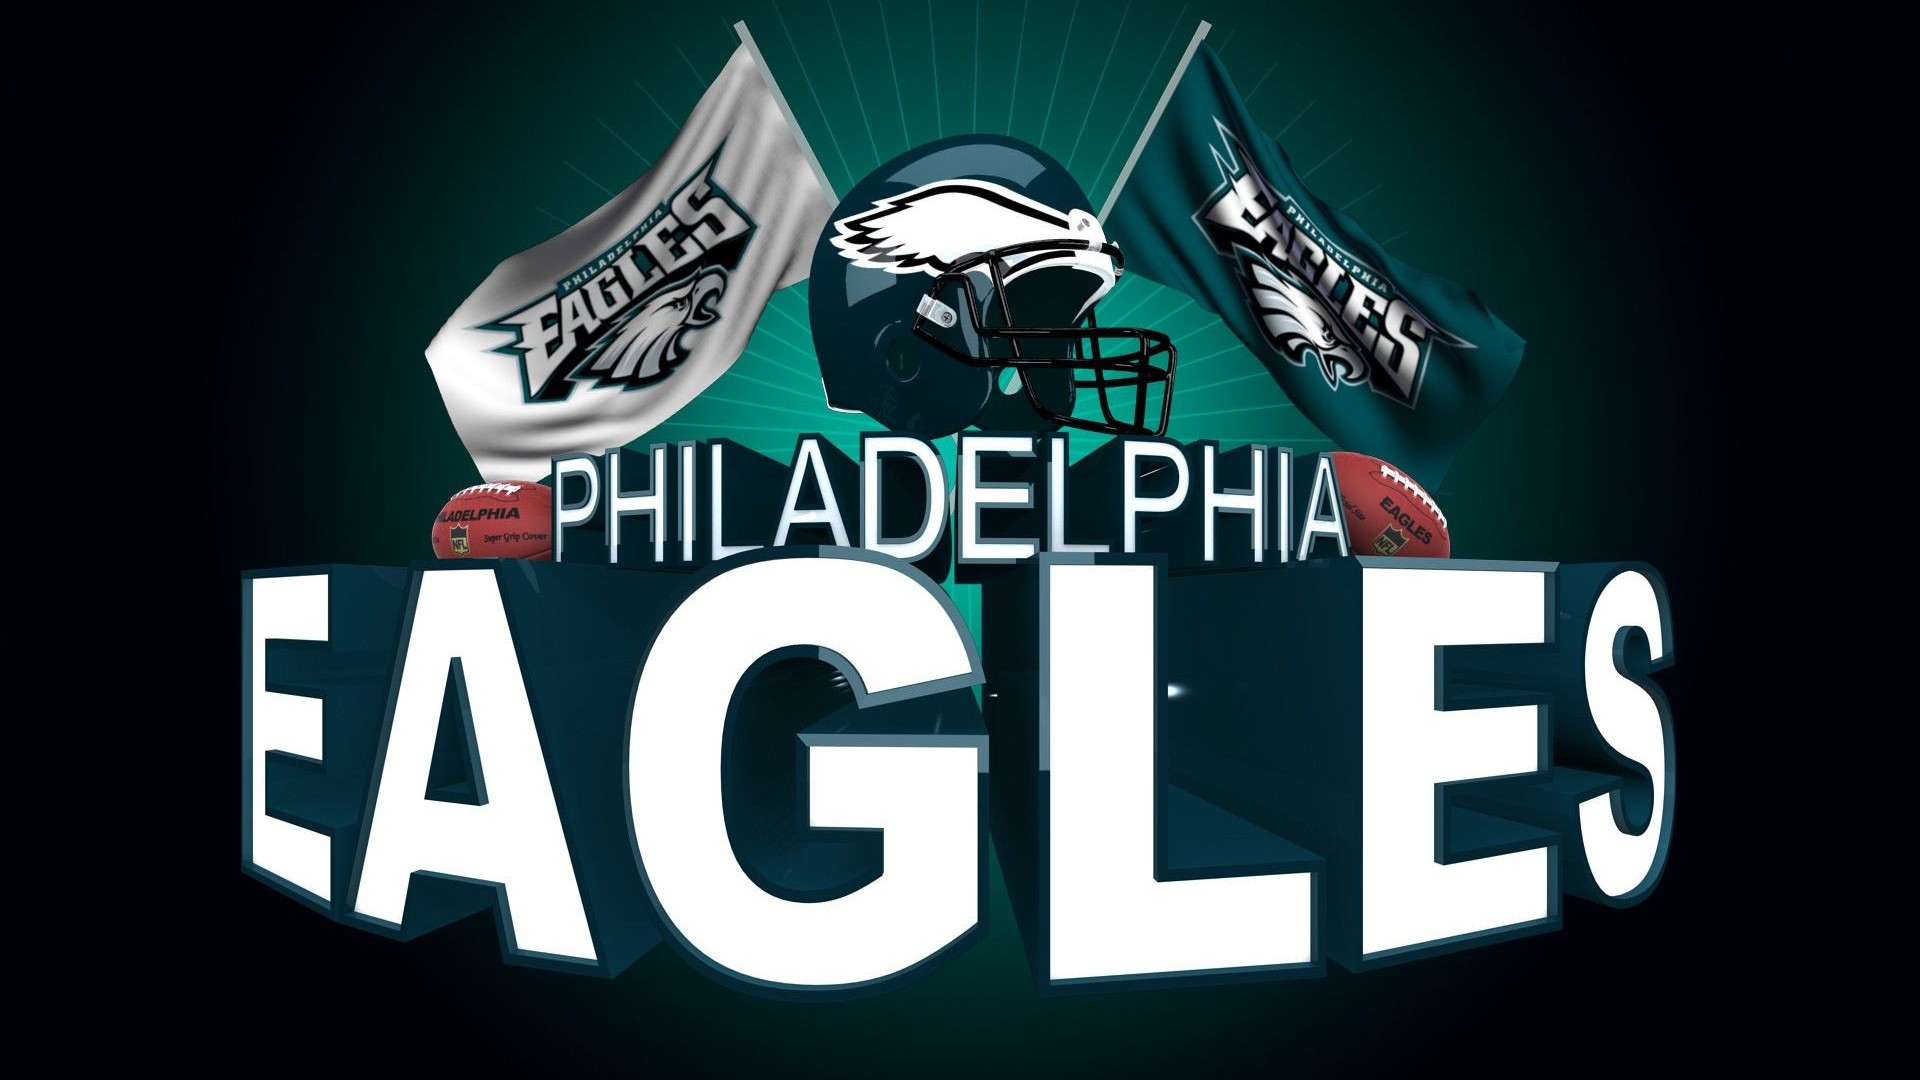 Eagles Football Mac Backgrounds with resolution 1920x1080 pixel. You can make this wallpaper for your Mac or Windows Desktop Background, iPhone, Android or Tablet and another Smartphone device